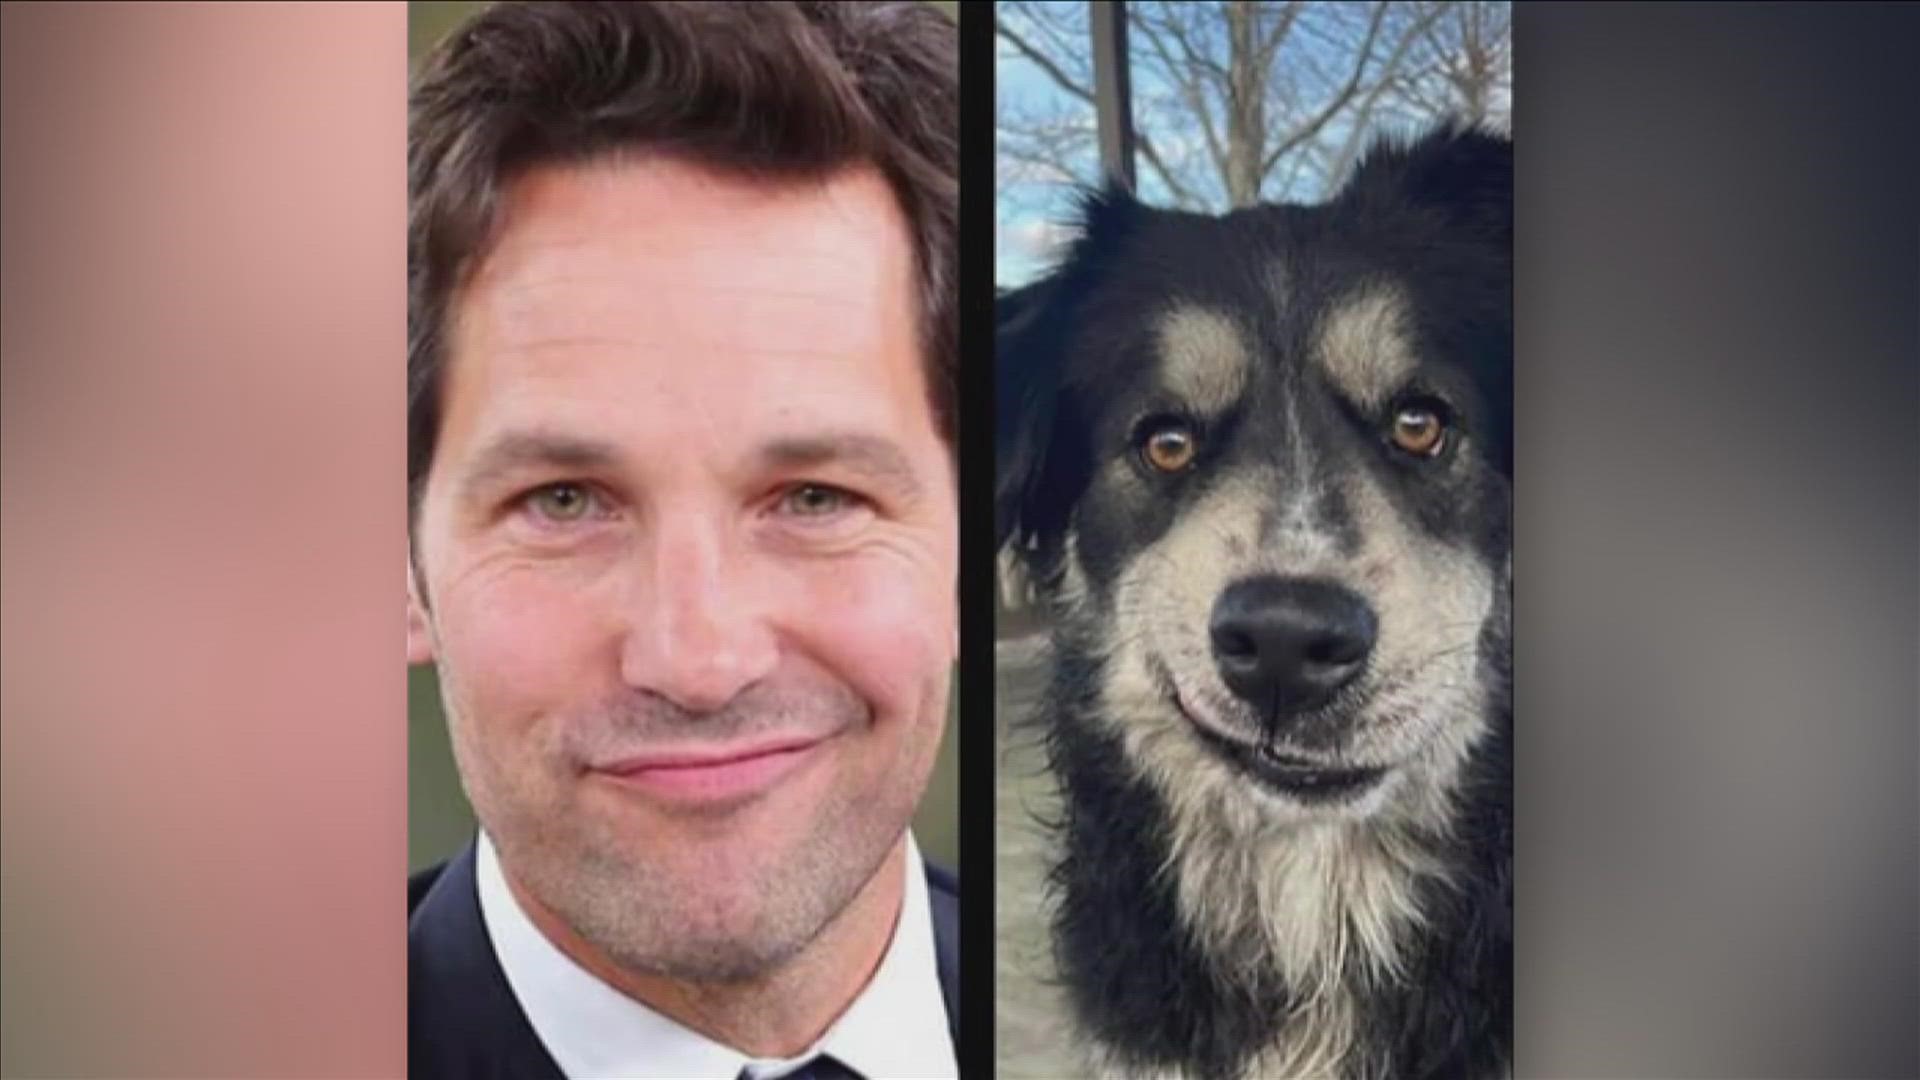 After going viral for a resemblance to “Ant-Man” star Paul Rudd, a dog at The Collierville Animal Shelter has a new home.